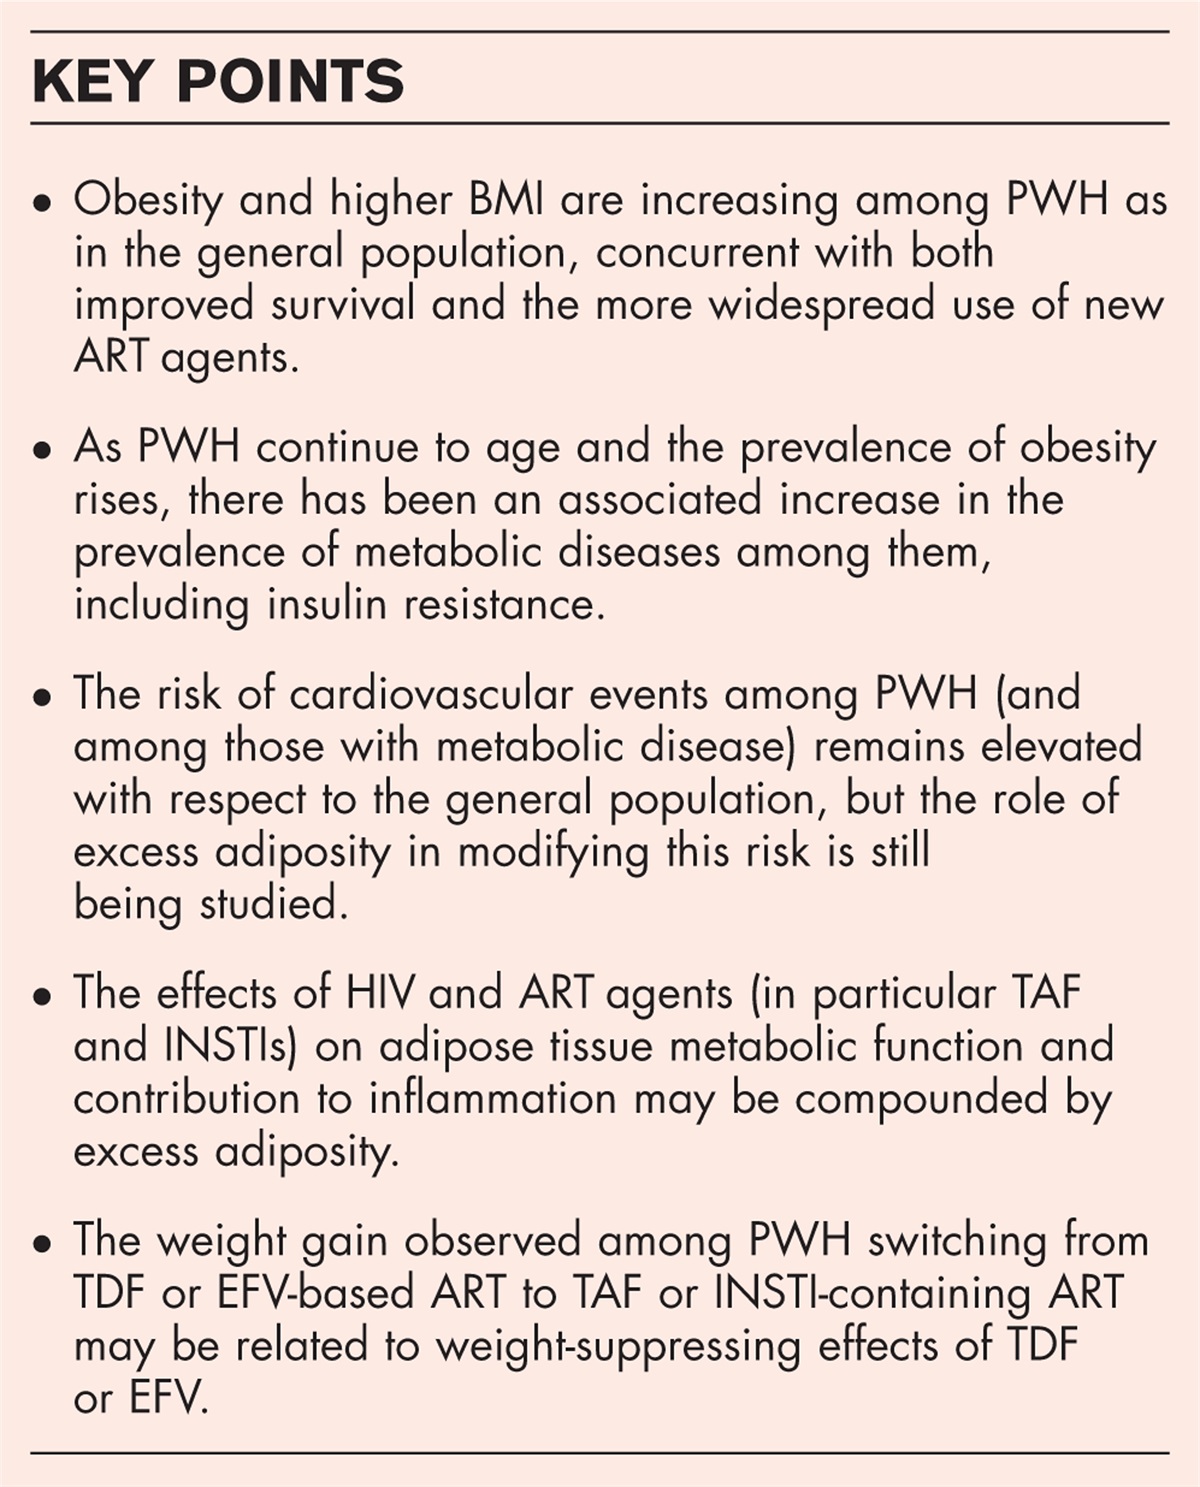 The pathogenesis of obesity in people living with HIV